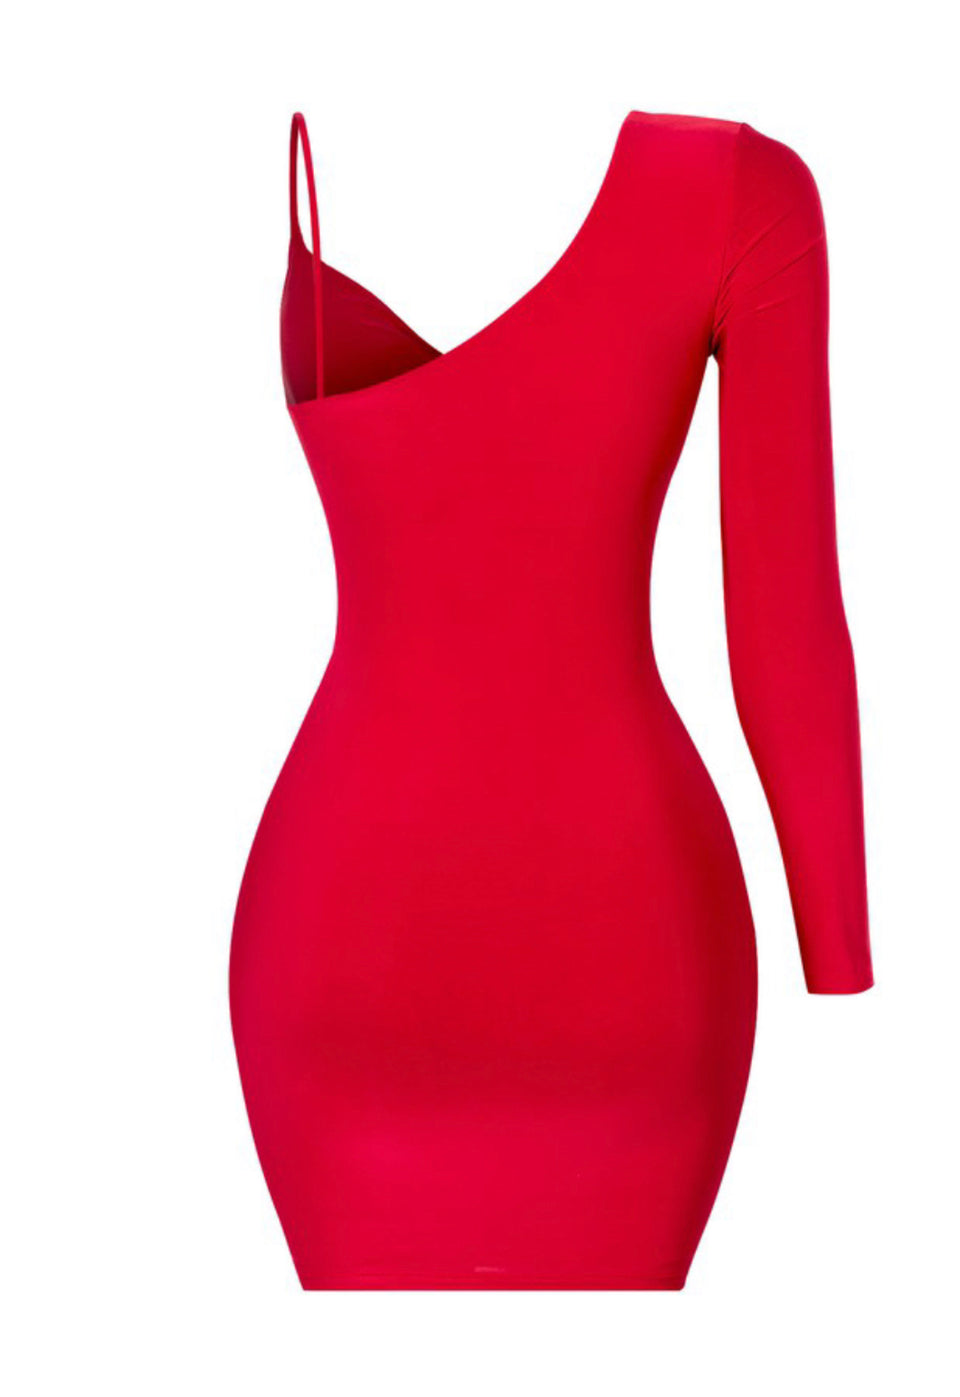 Passionate Love Dress - Red